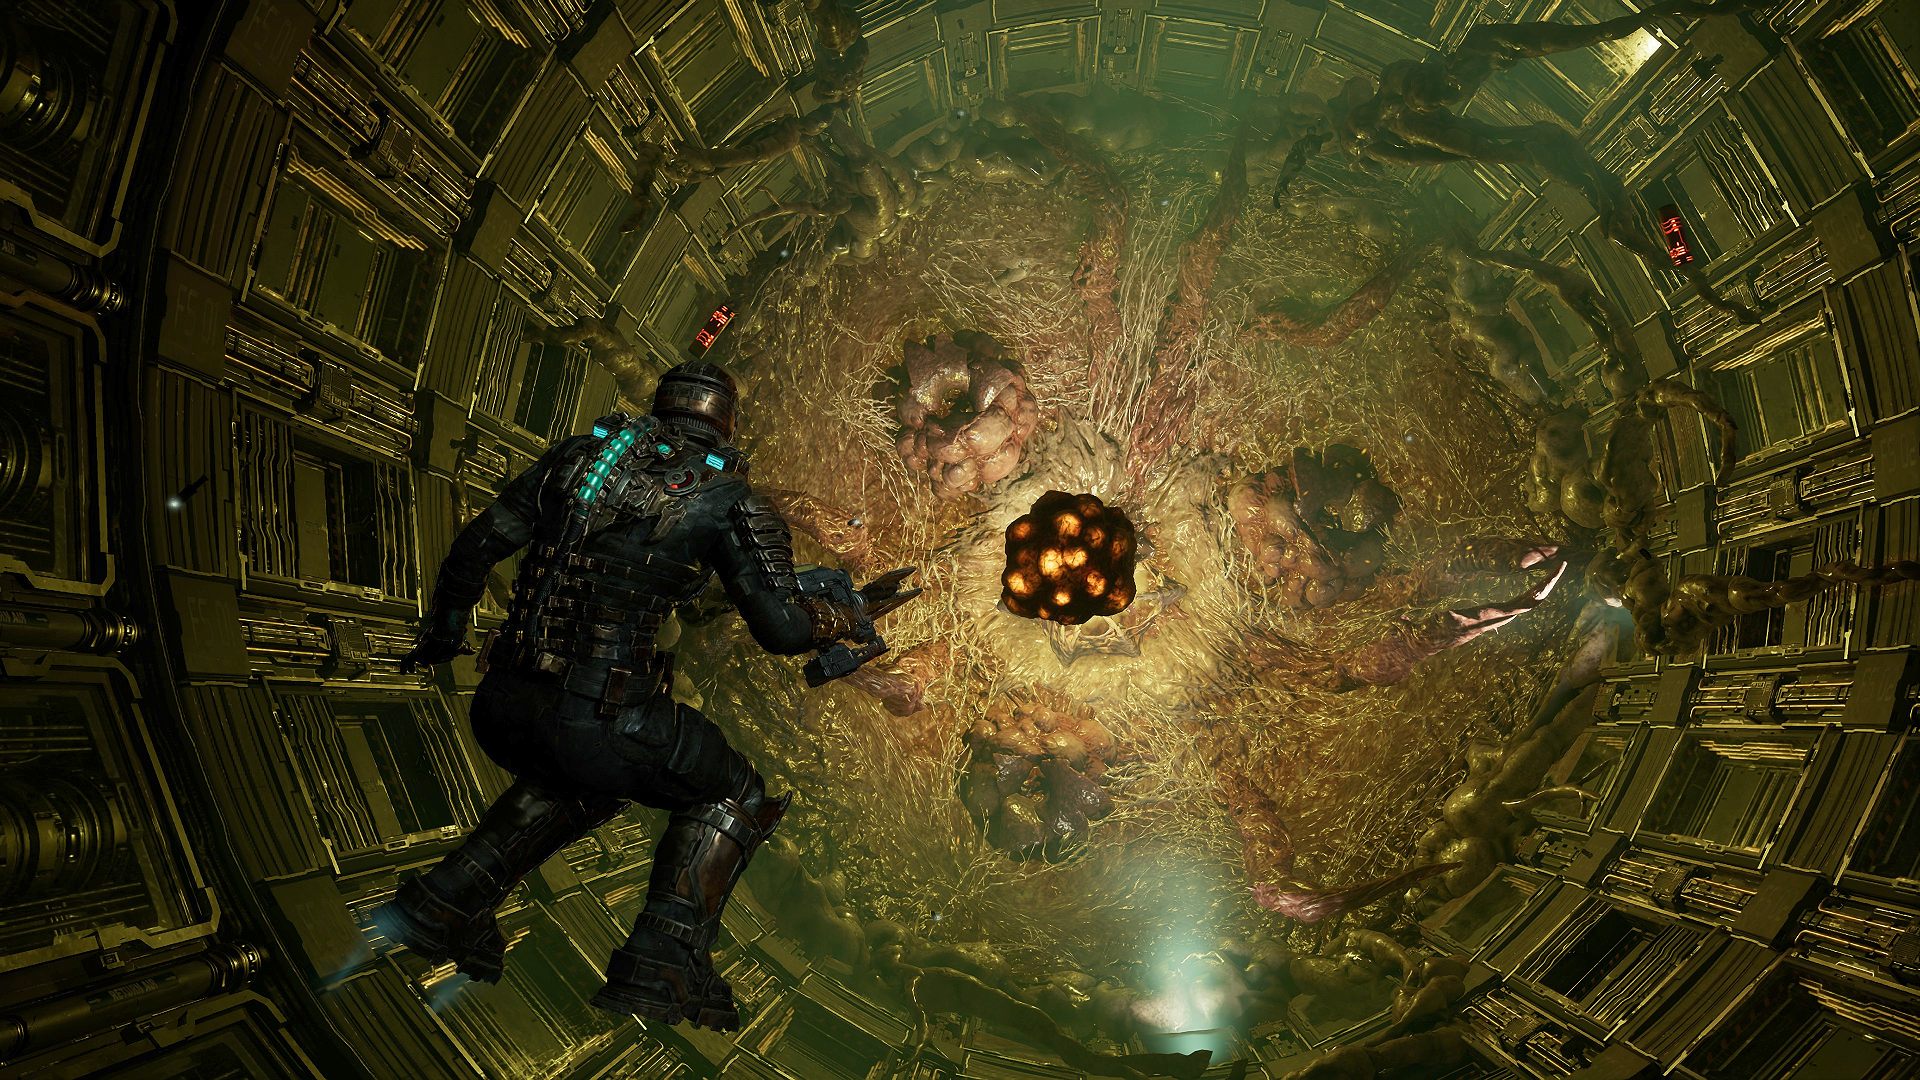 Dead Space Remake review: Isaac Clark floating in zero gravity withj Leviathan boss fight ahead